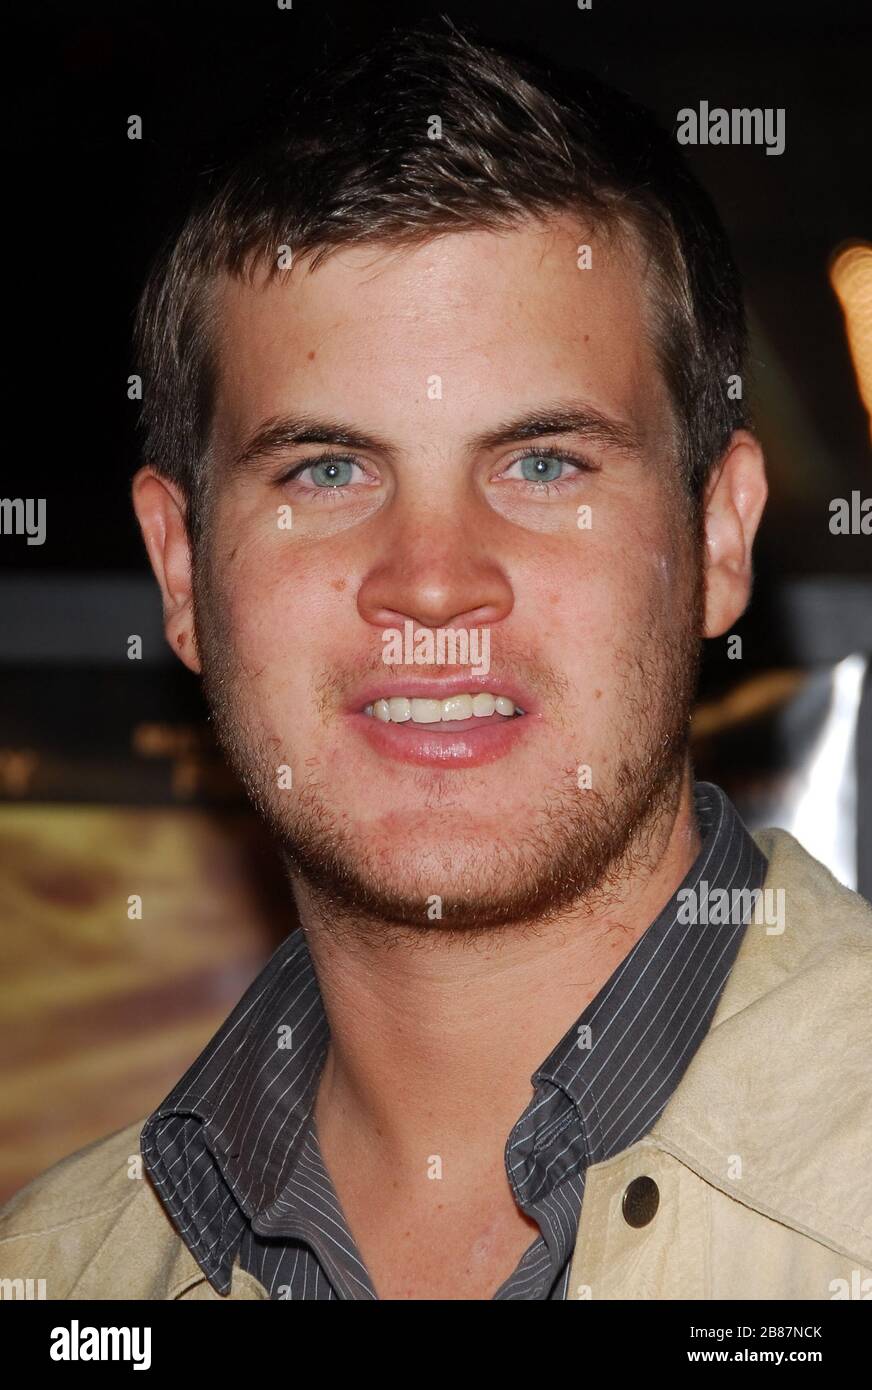 Screenplay Writer Jamie Linden at the Premiere of 'We Are Marshall' held at the Grauman's Chinese Theatre in Hollywood, CA. The event took place on Thursday, December 14, 2006.  Photo by: SBM / PictureLux - File Reference # 33984-9766SBMPLX Stock Photo